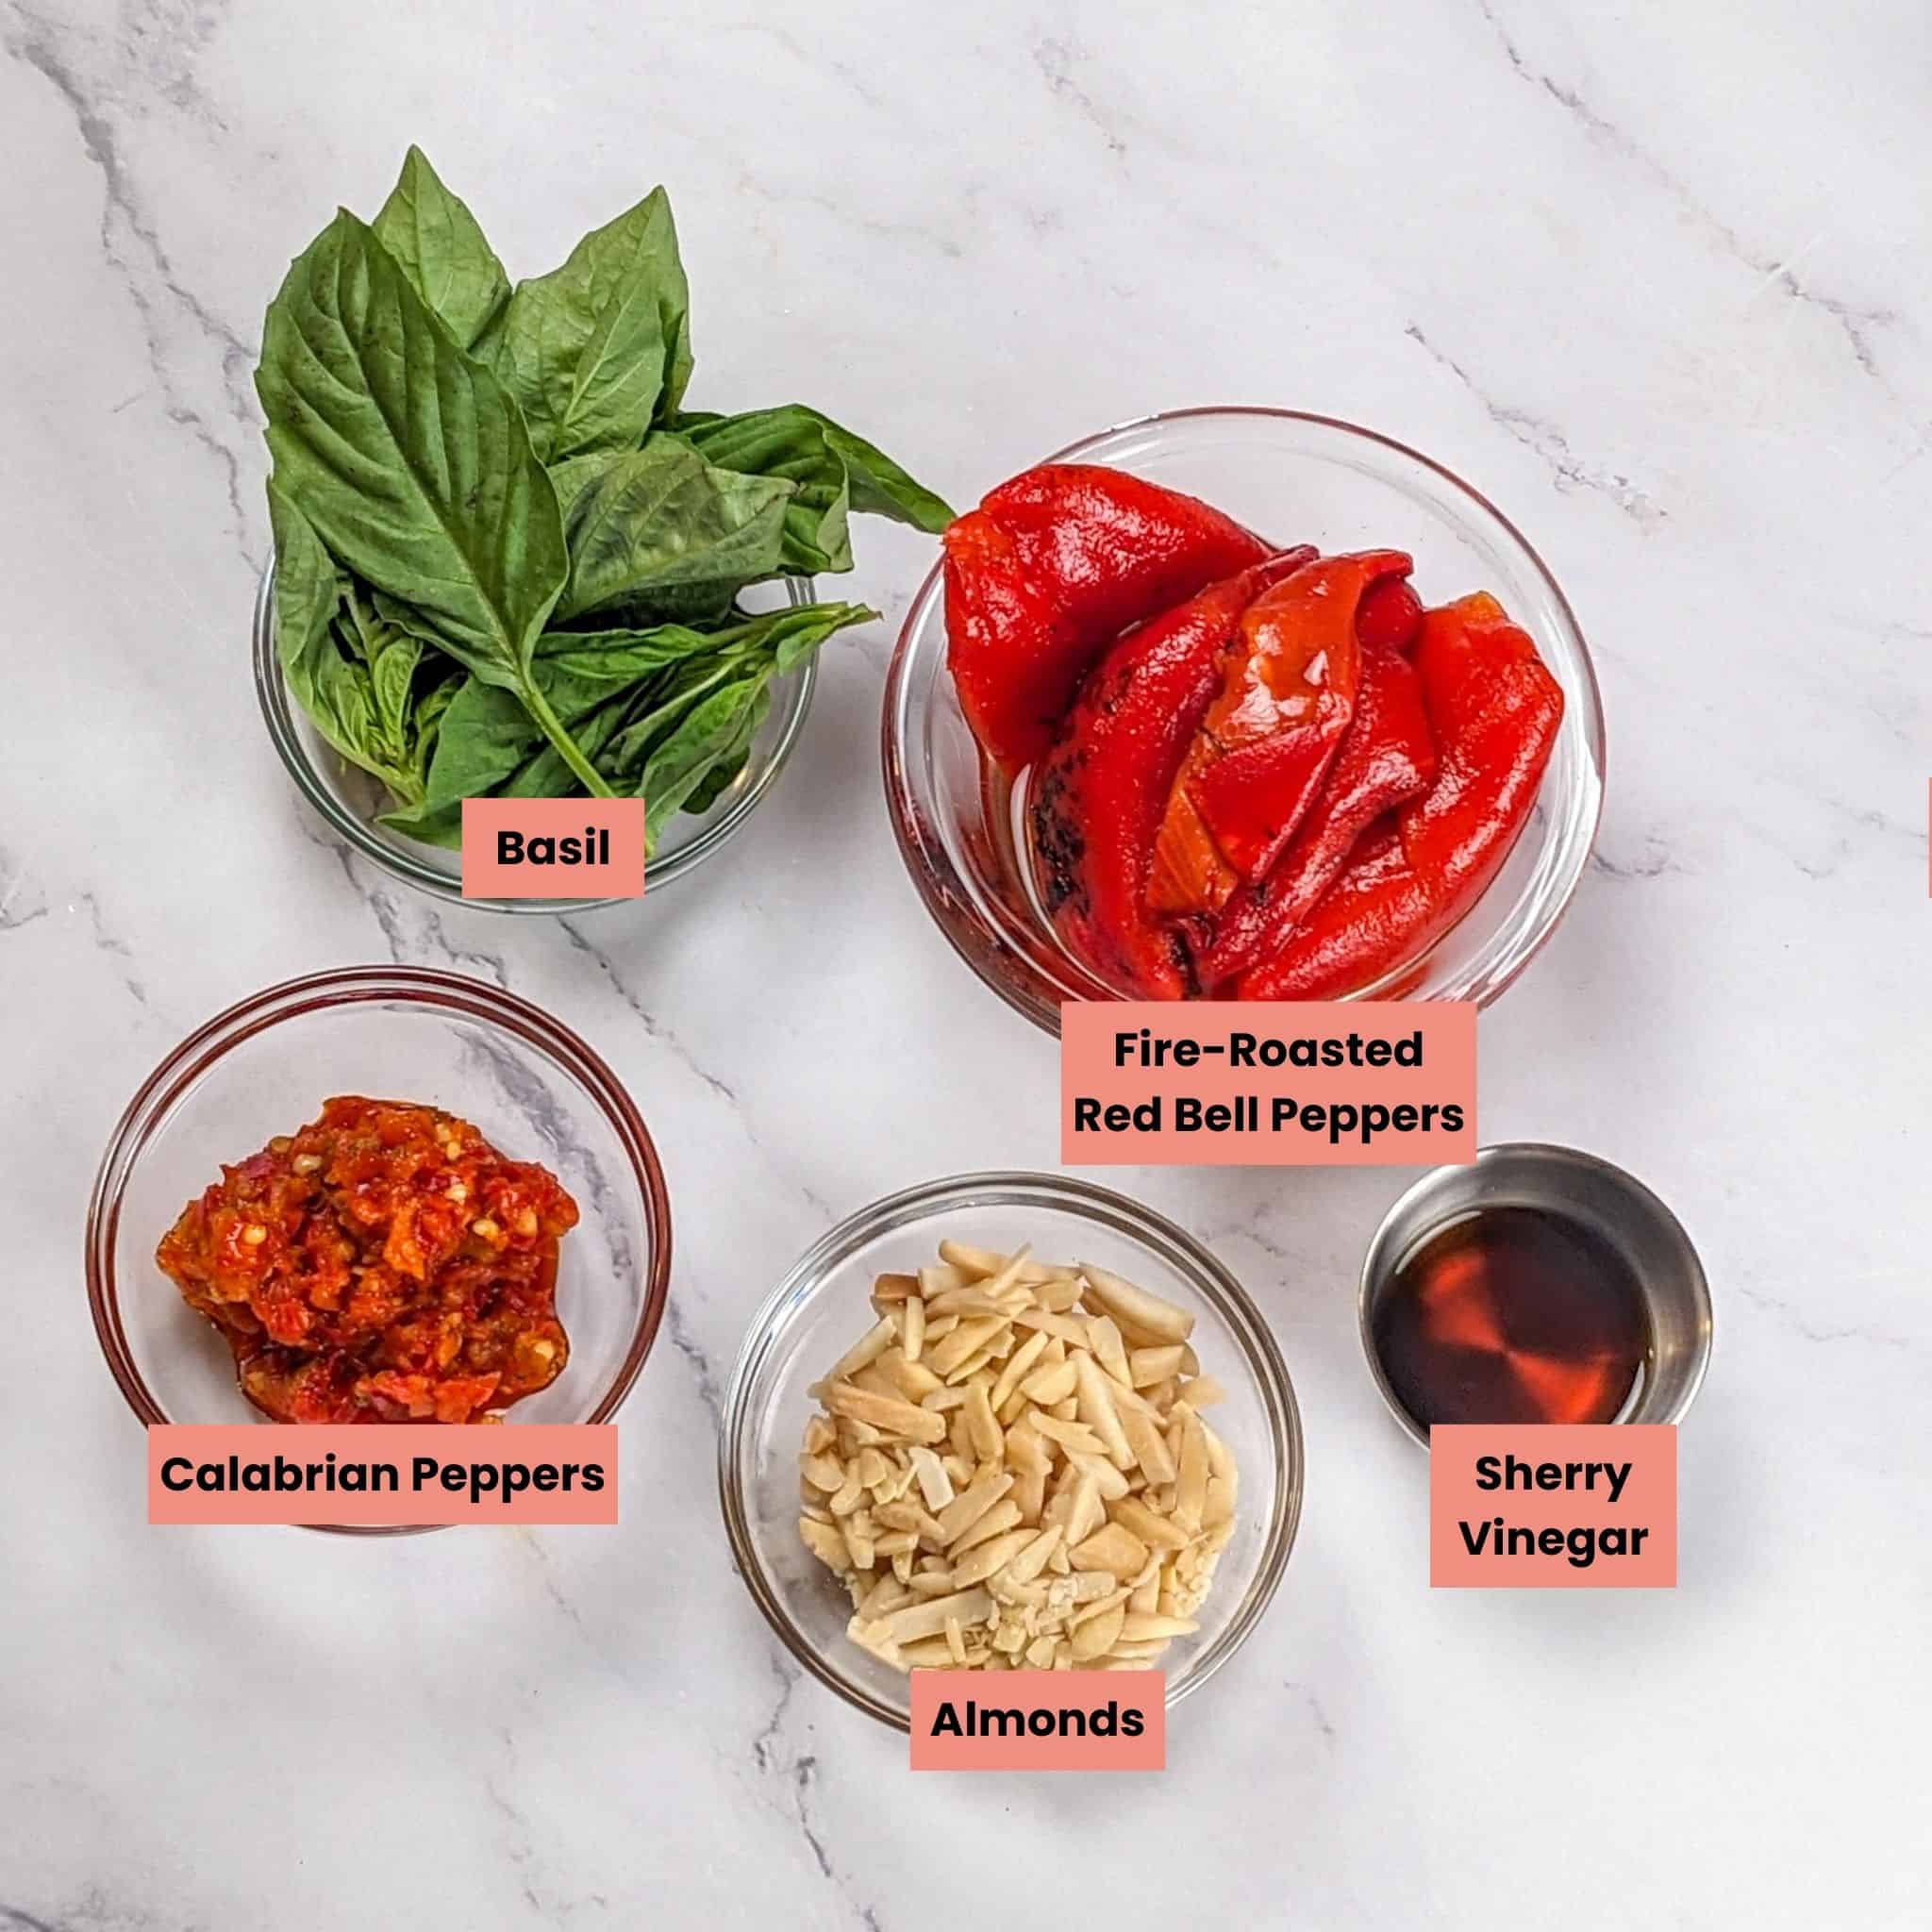 ingredients for the Spicy Basil Romesco Sauce in dishes.